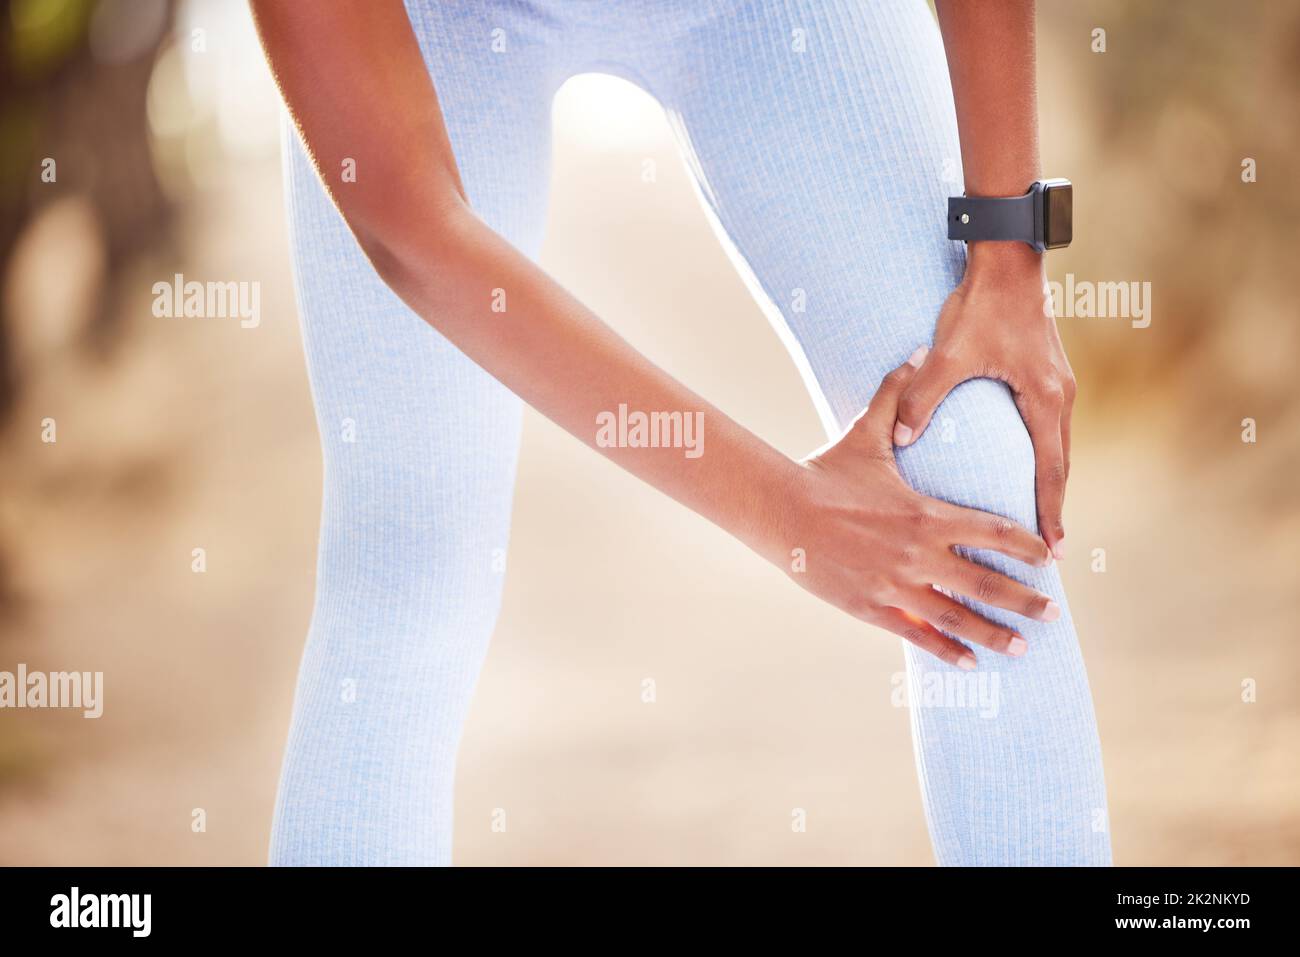 My knee has been acting up. Shot of a woman clutching her knee in pain during a jog. Stock Photo